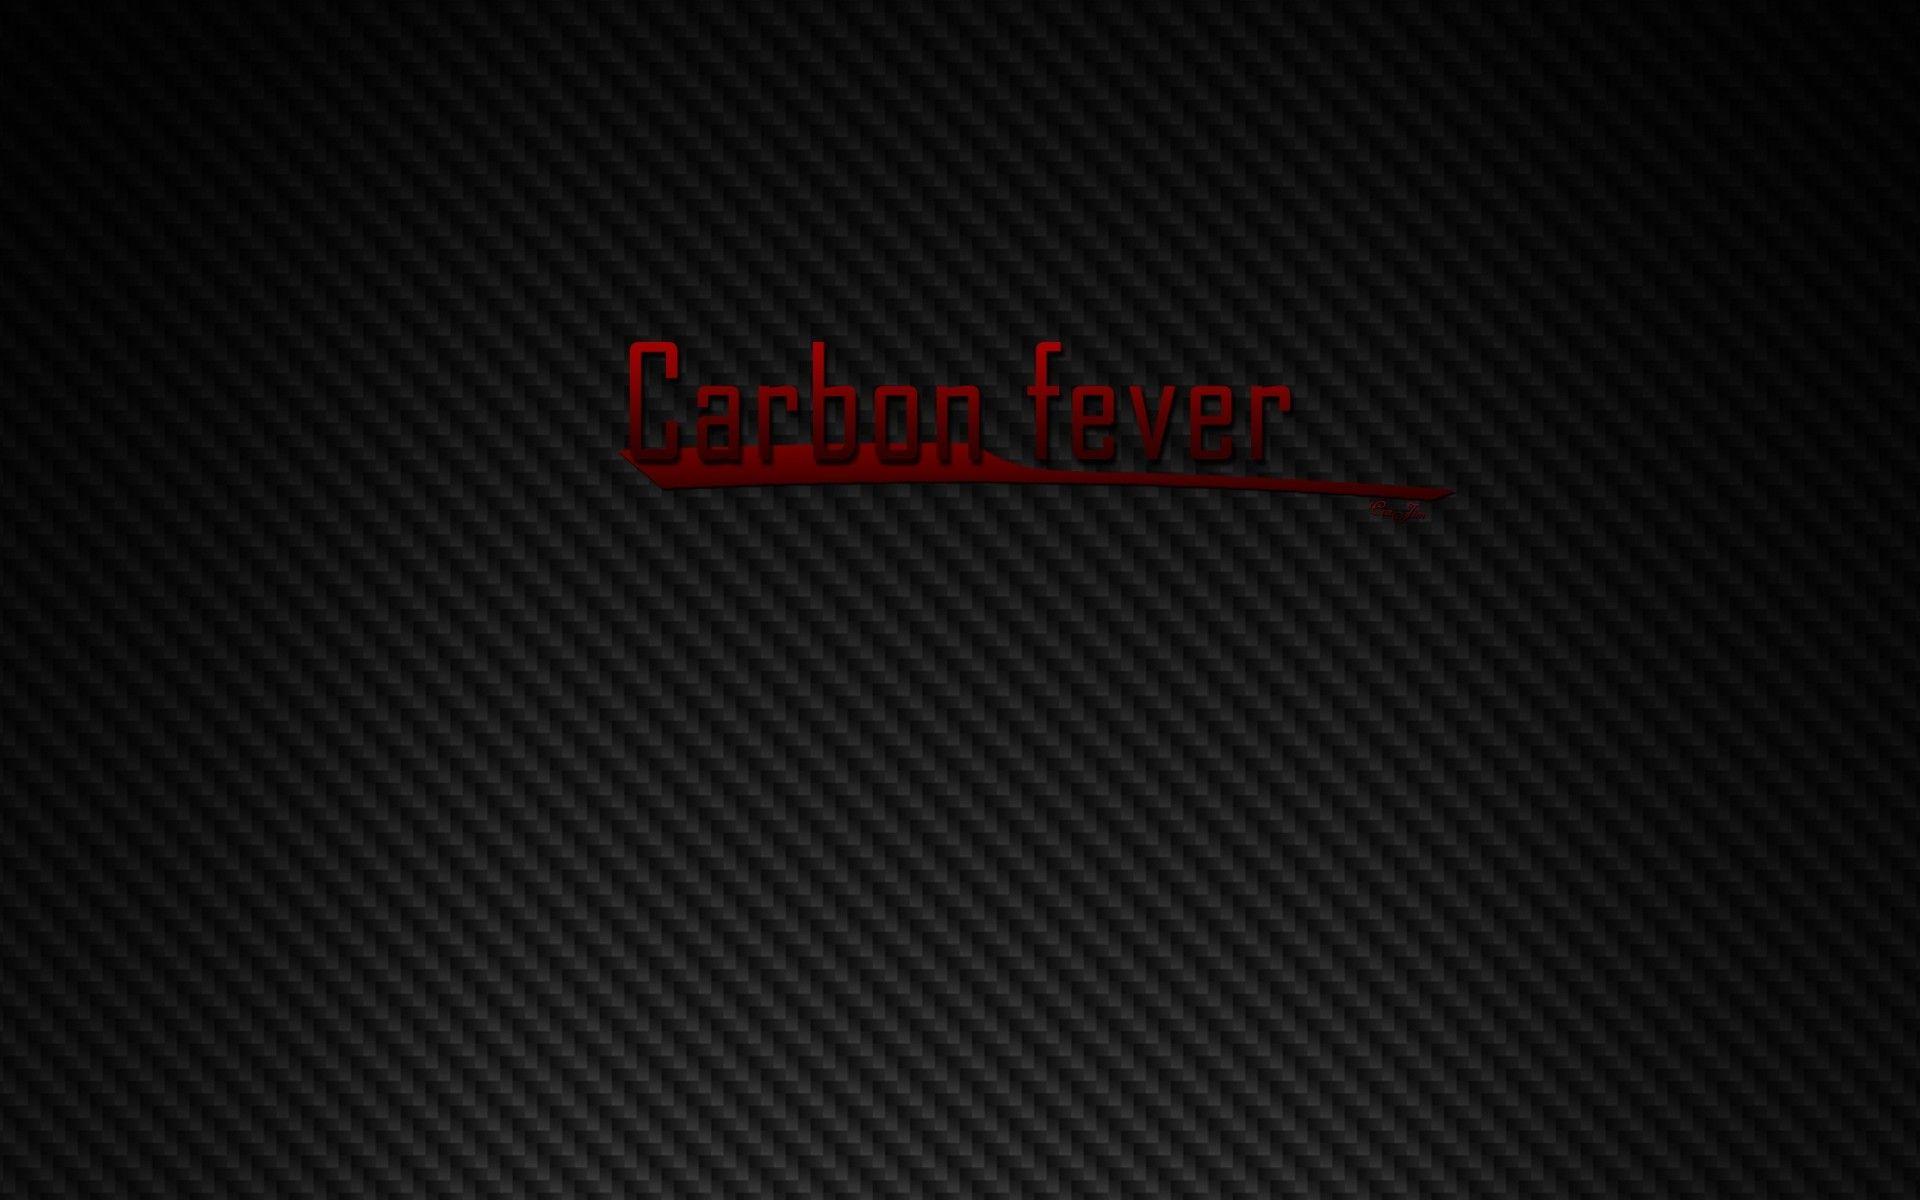 Carbon Fever. Android wallpaper for free